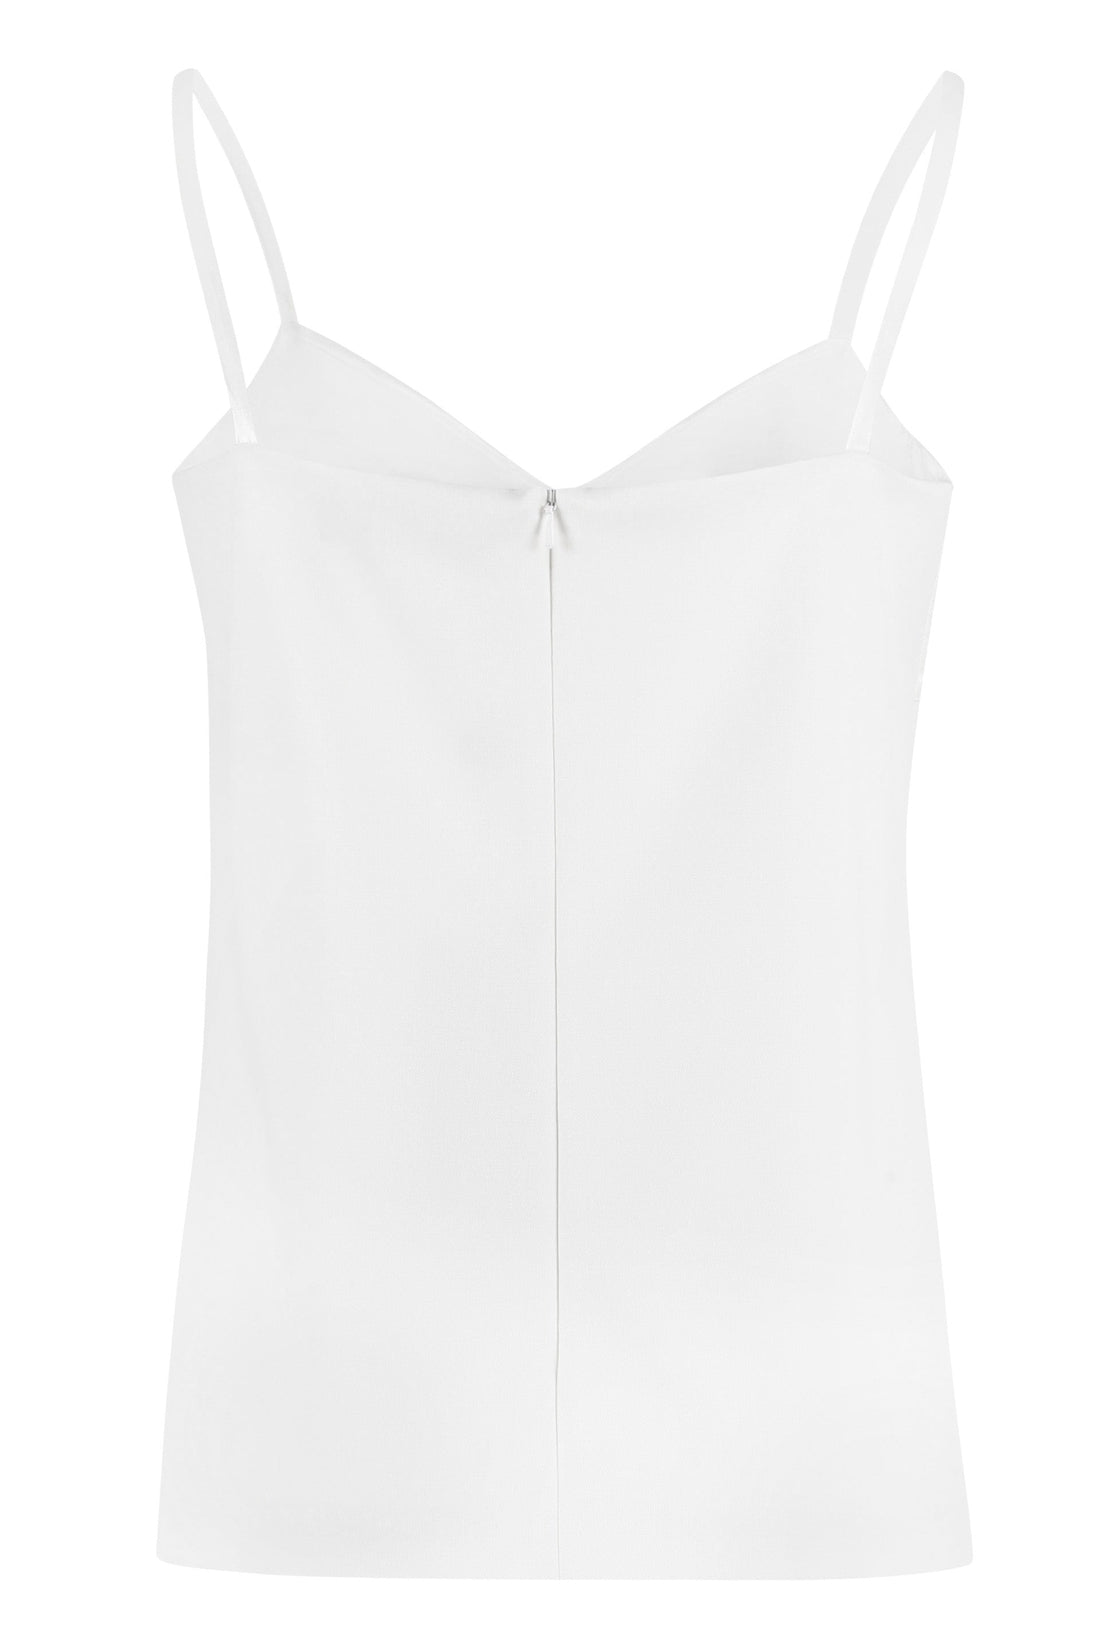 Max Mara-OUTLET-SALE-Wool and silk camisole-ARCHIVIST